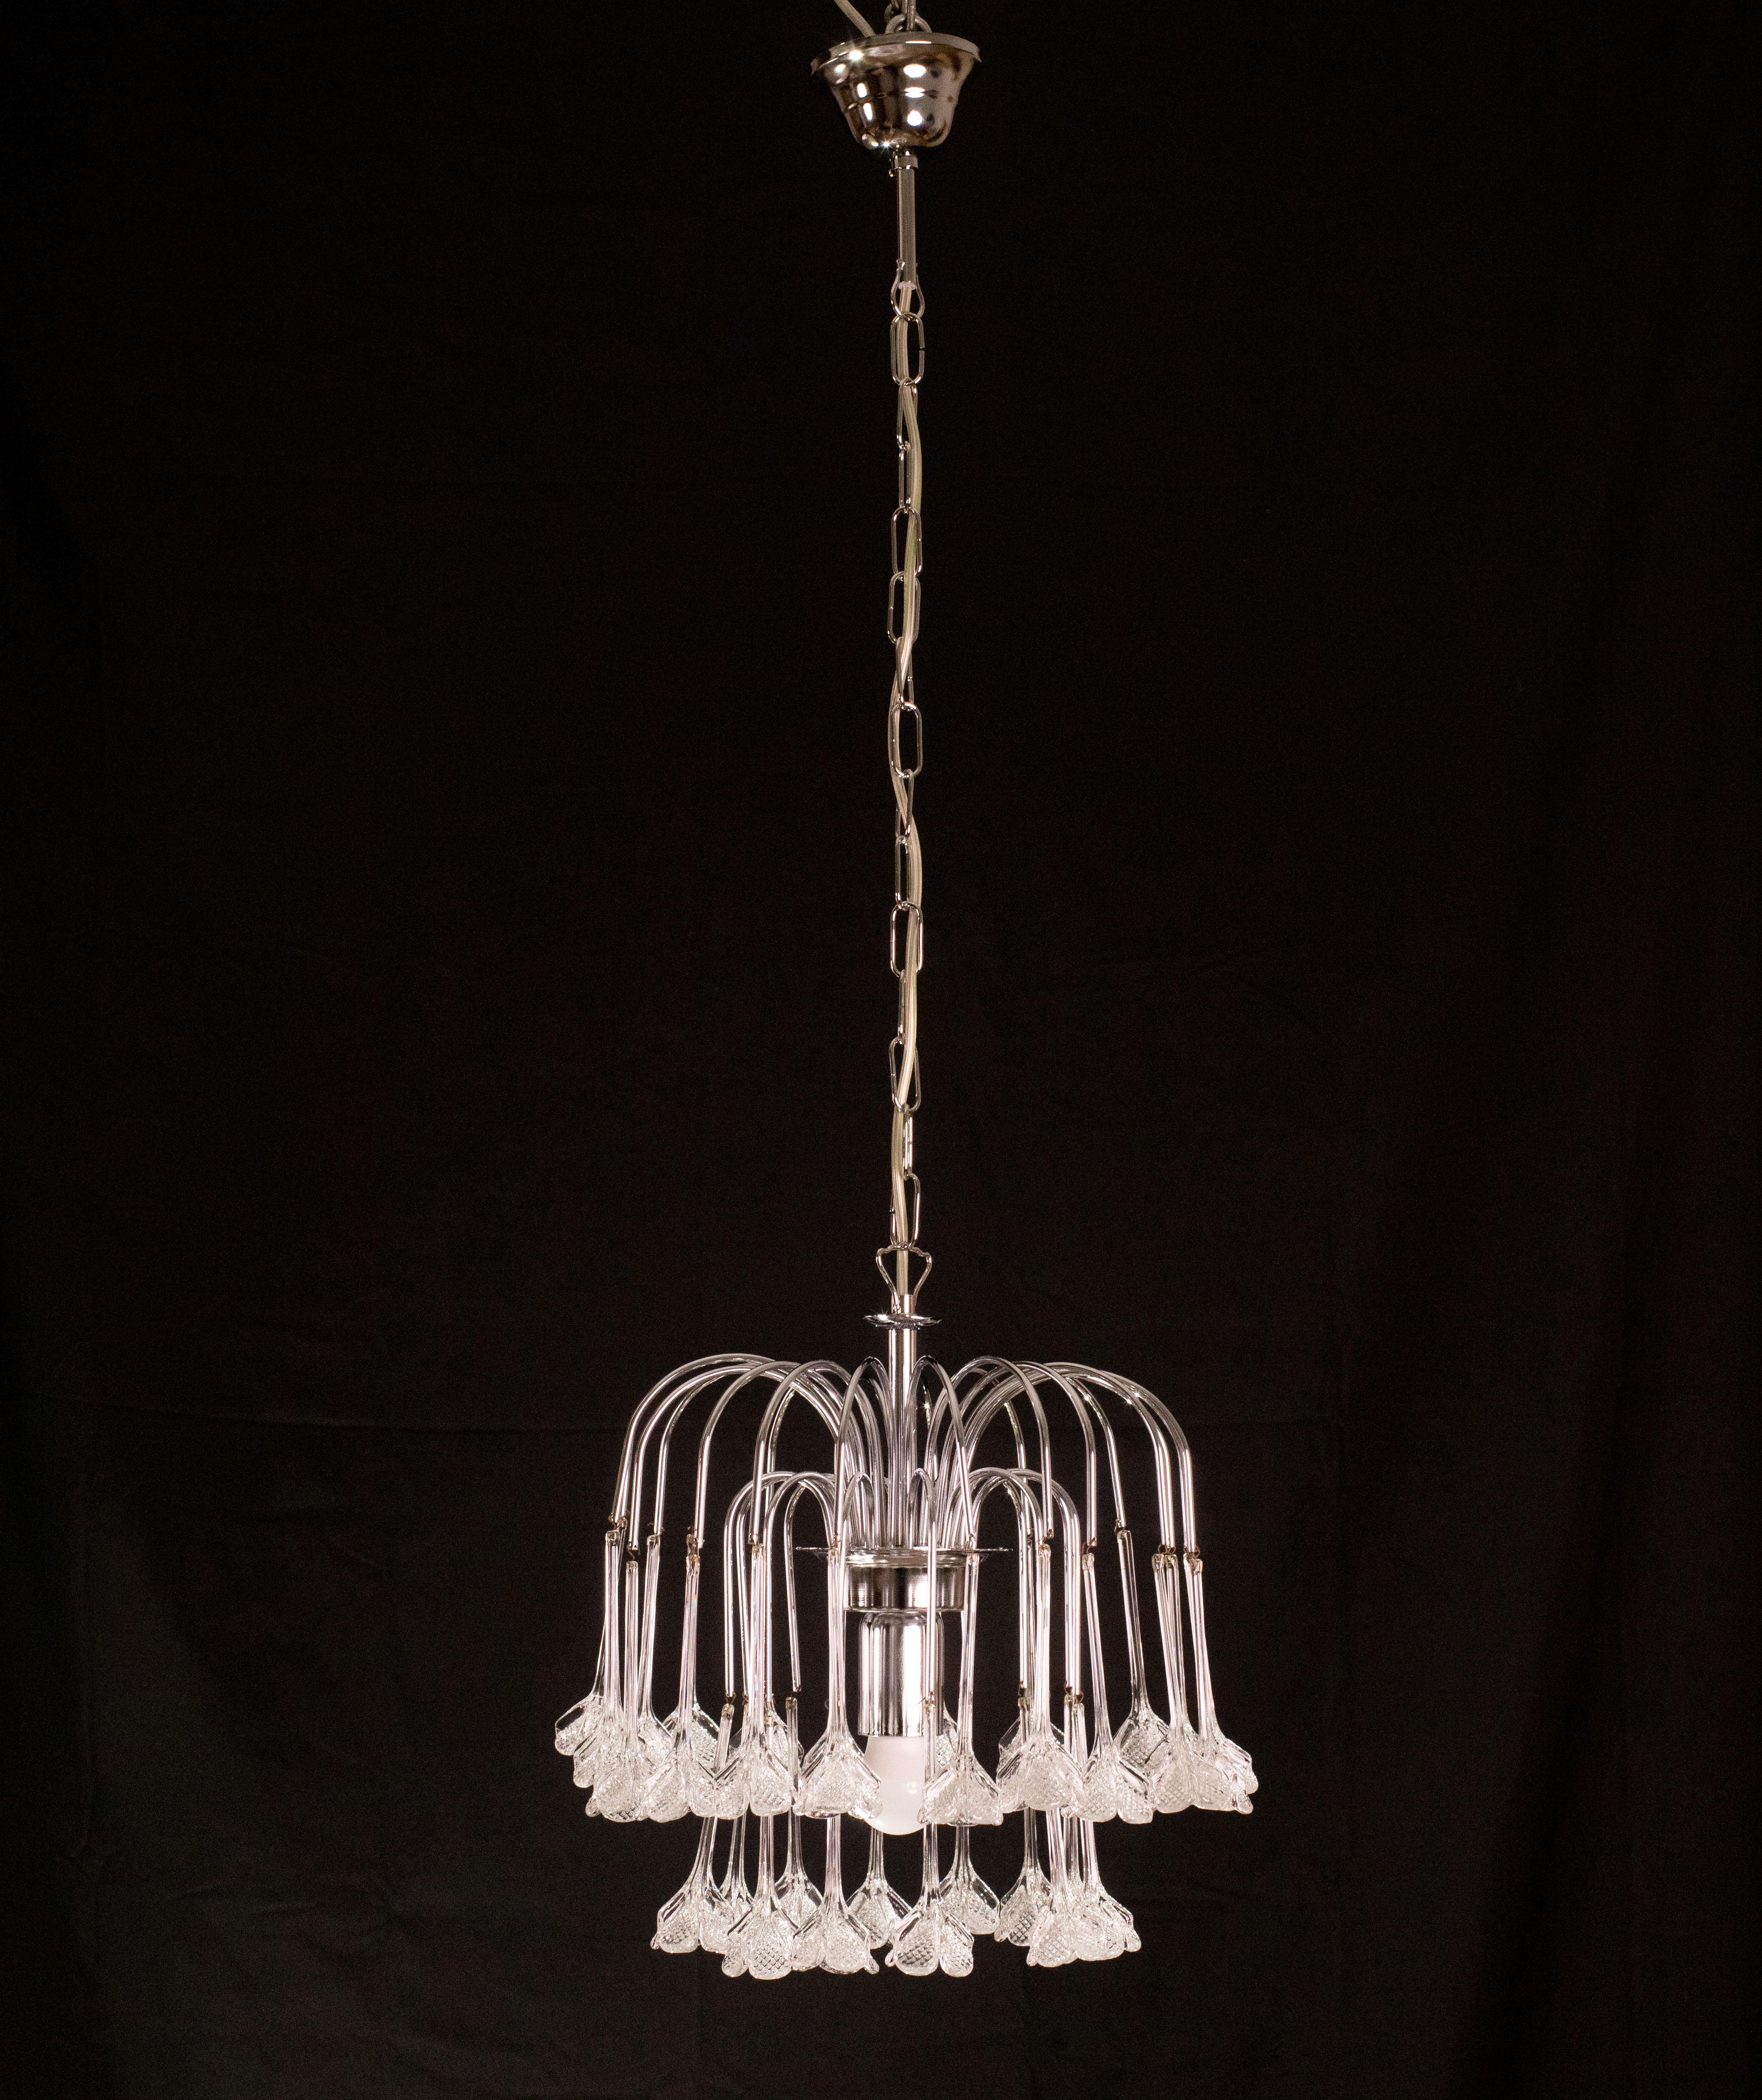 Set of 2 Julia Roberts, Vintage White Murano Chandelier, 1980s For Sale 3